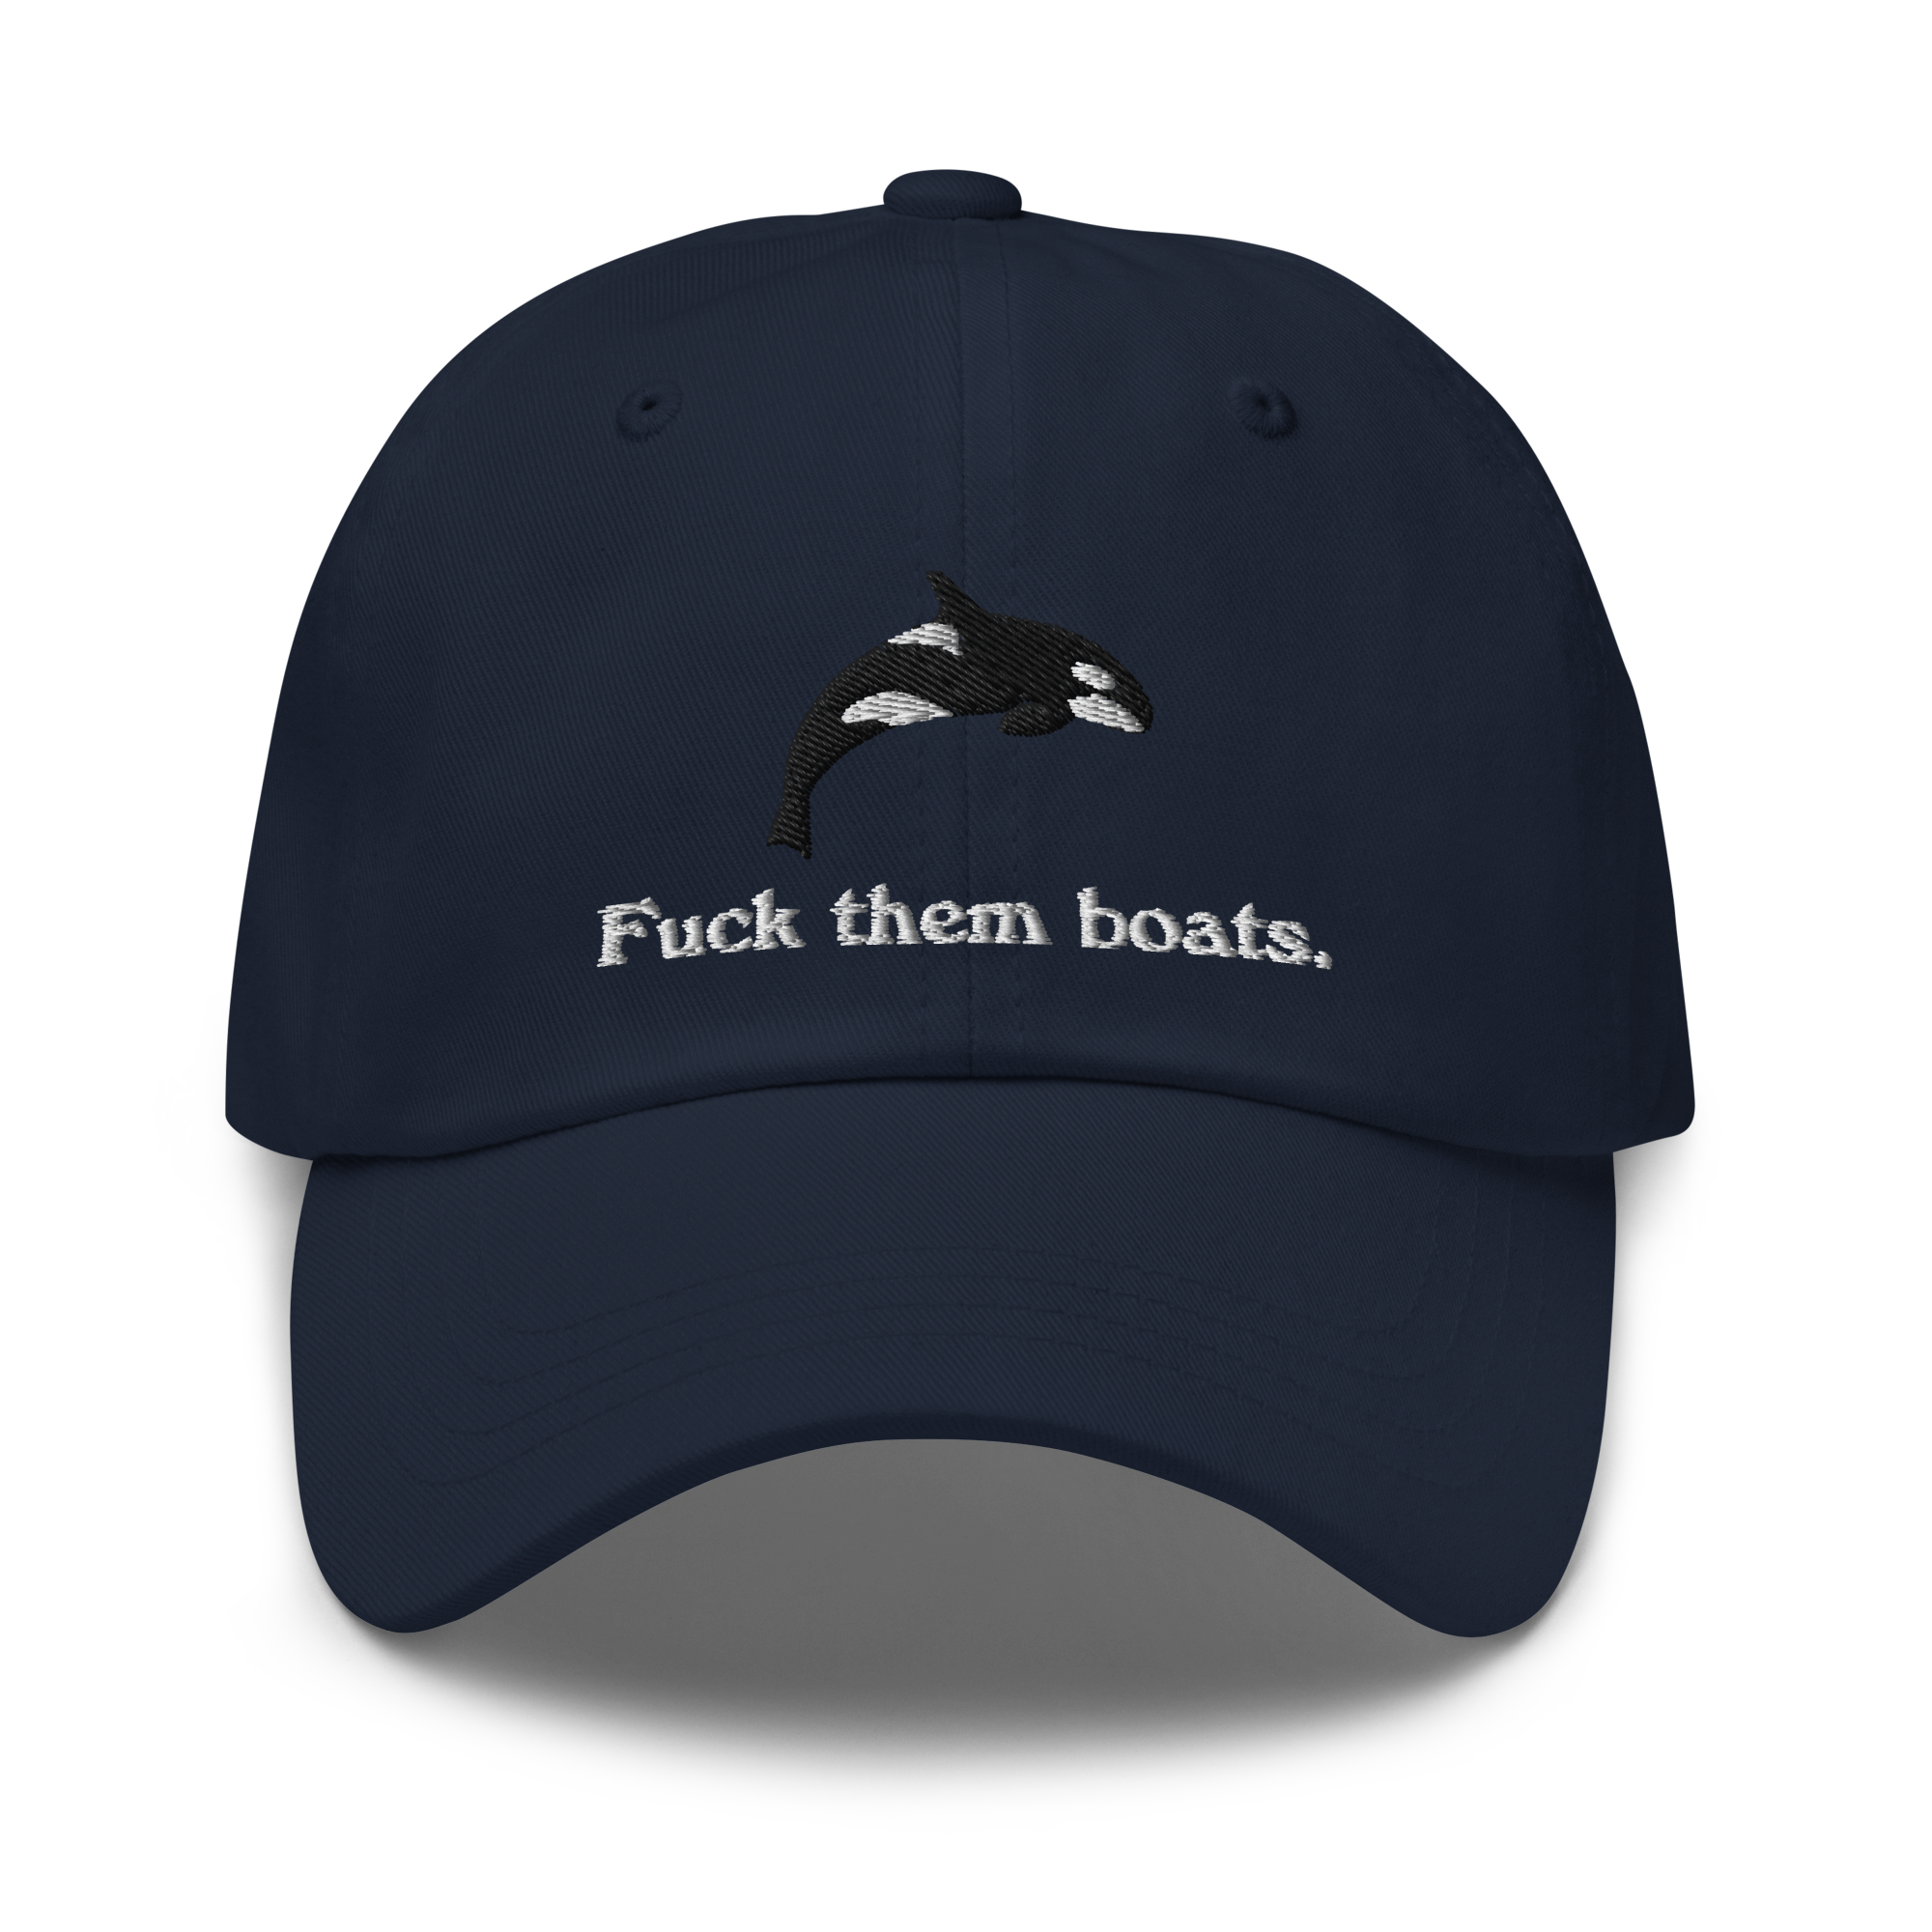 classic-dad-hat-navy-front-6542a9a067142.png